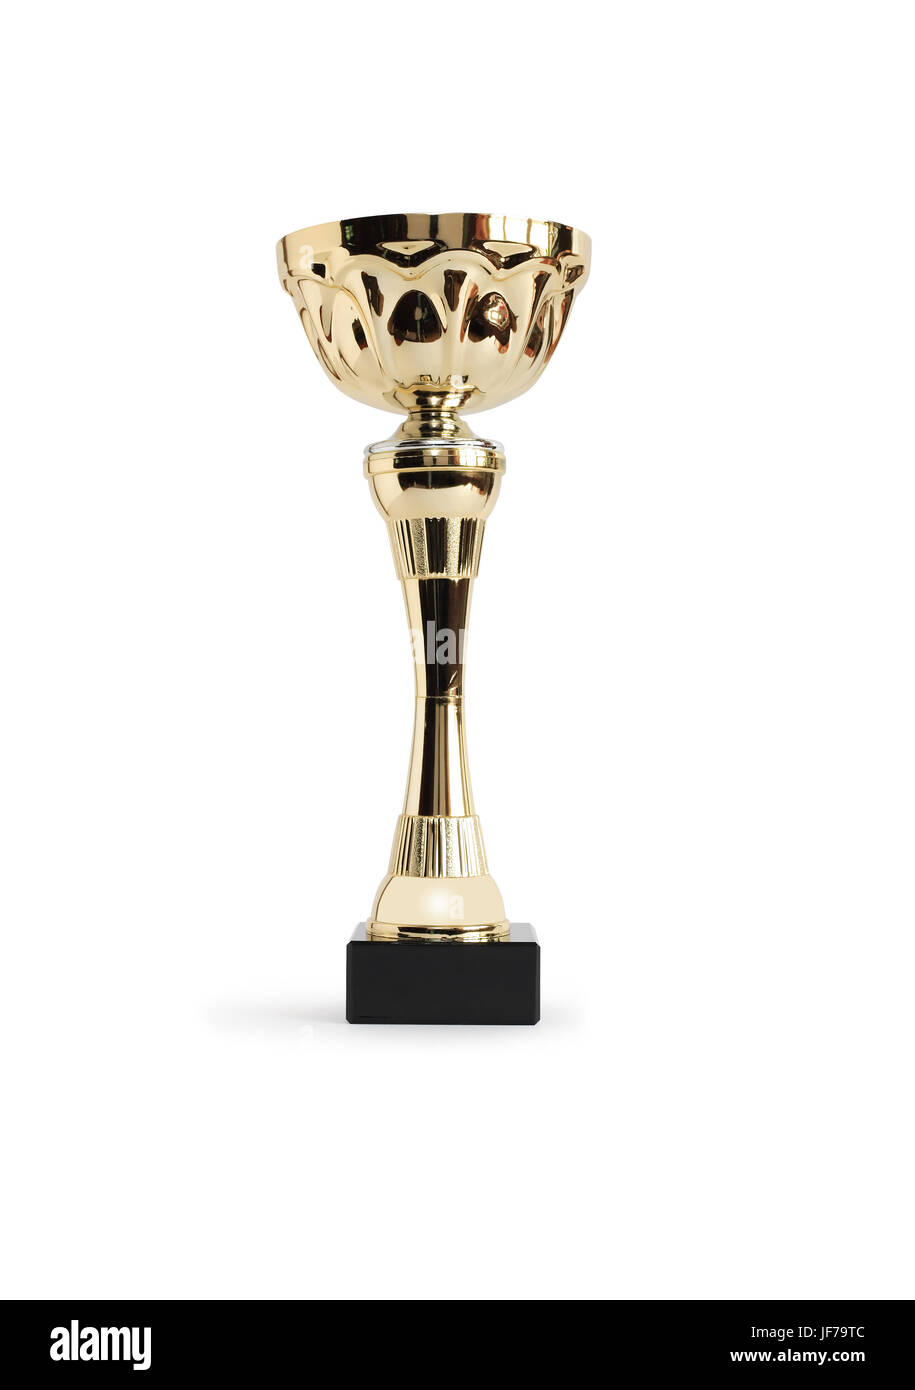 LARGE SILVER/GOLD PRESENTATION CUP TROPHY MULTI AWARD FREE ENGRAVING